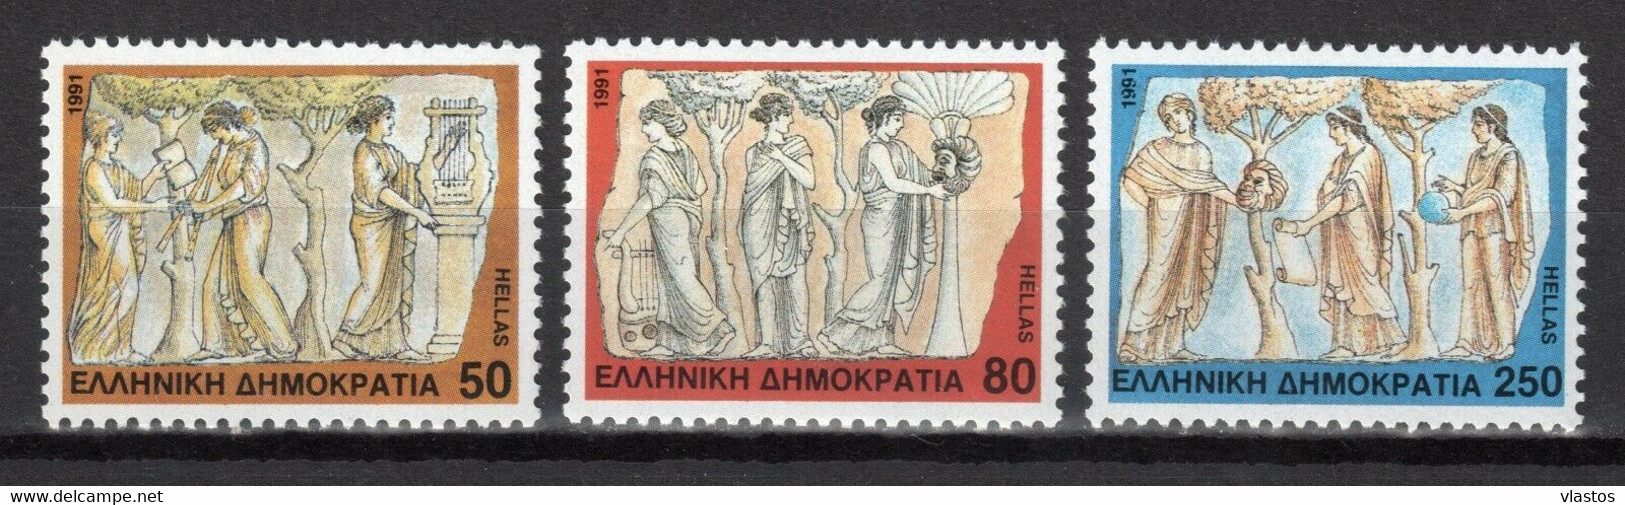 GREECE 1991 COMPLETE YEAR - PERFORATED + IMPERFORATE STAMPS MNH - Full Years